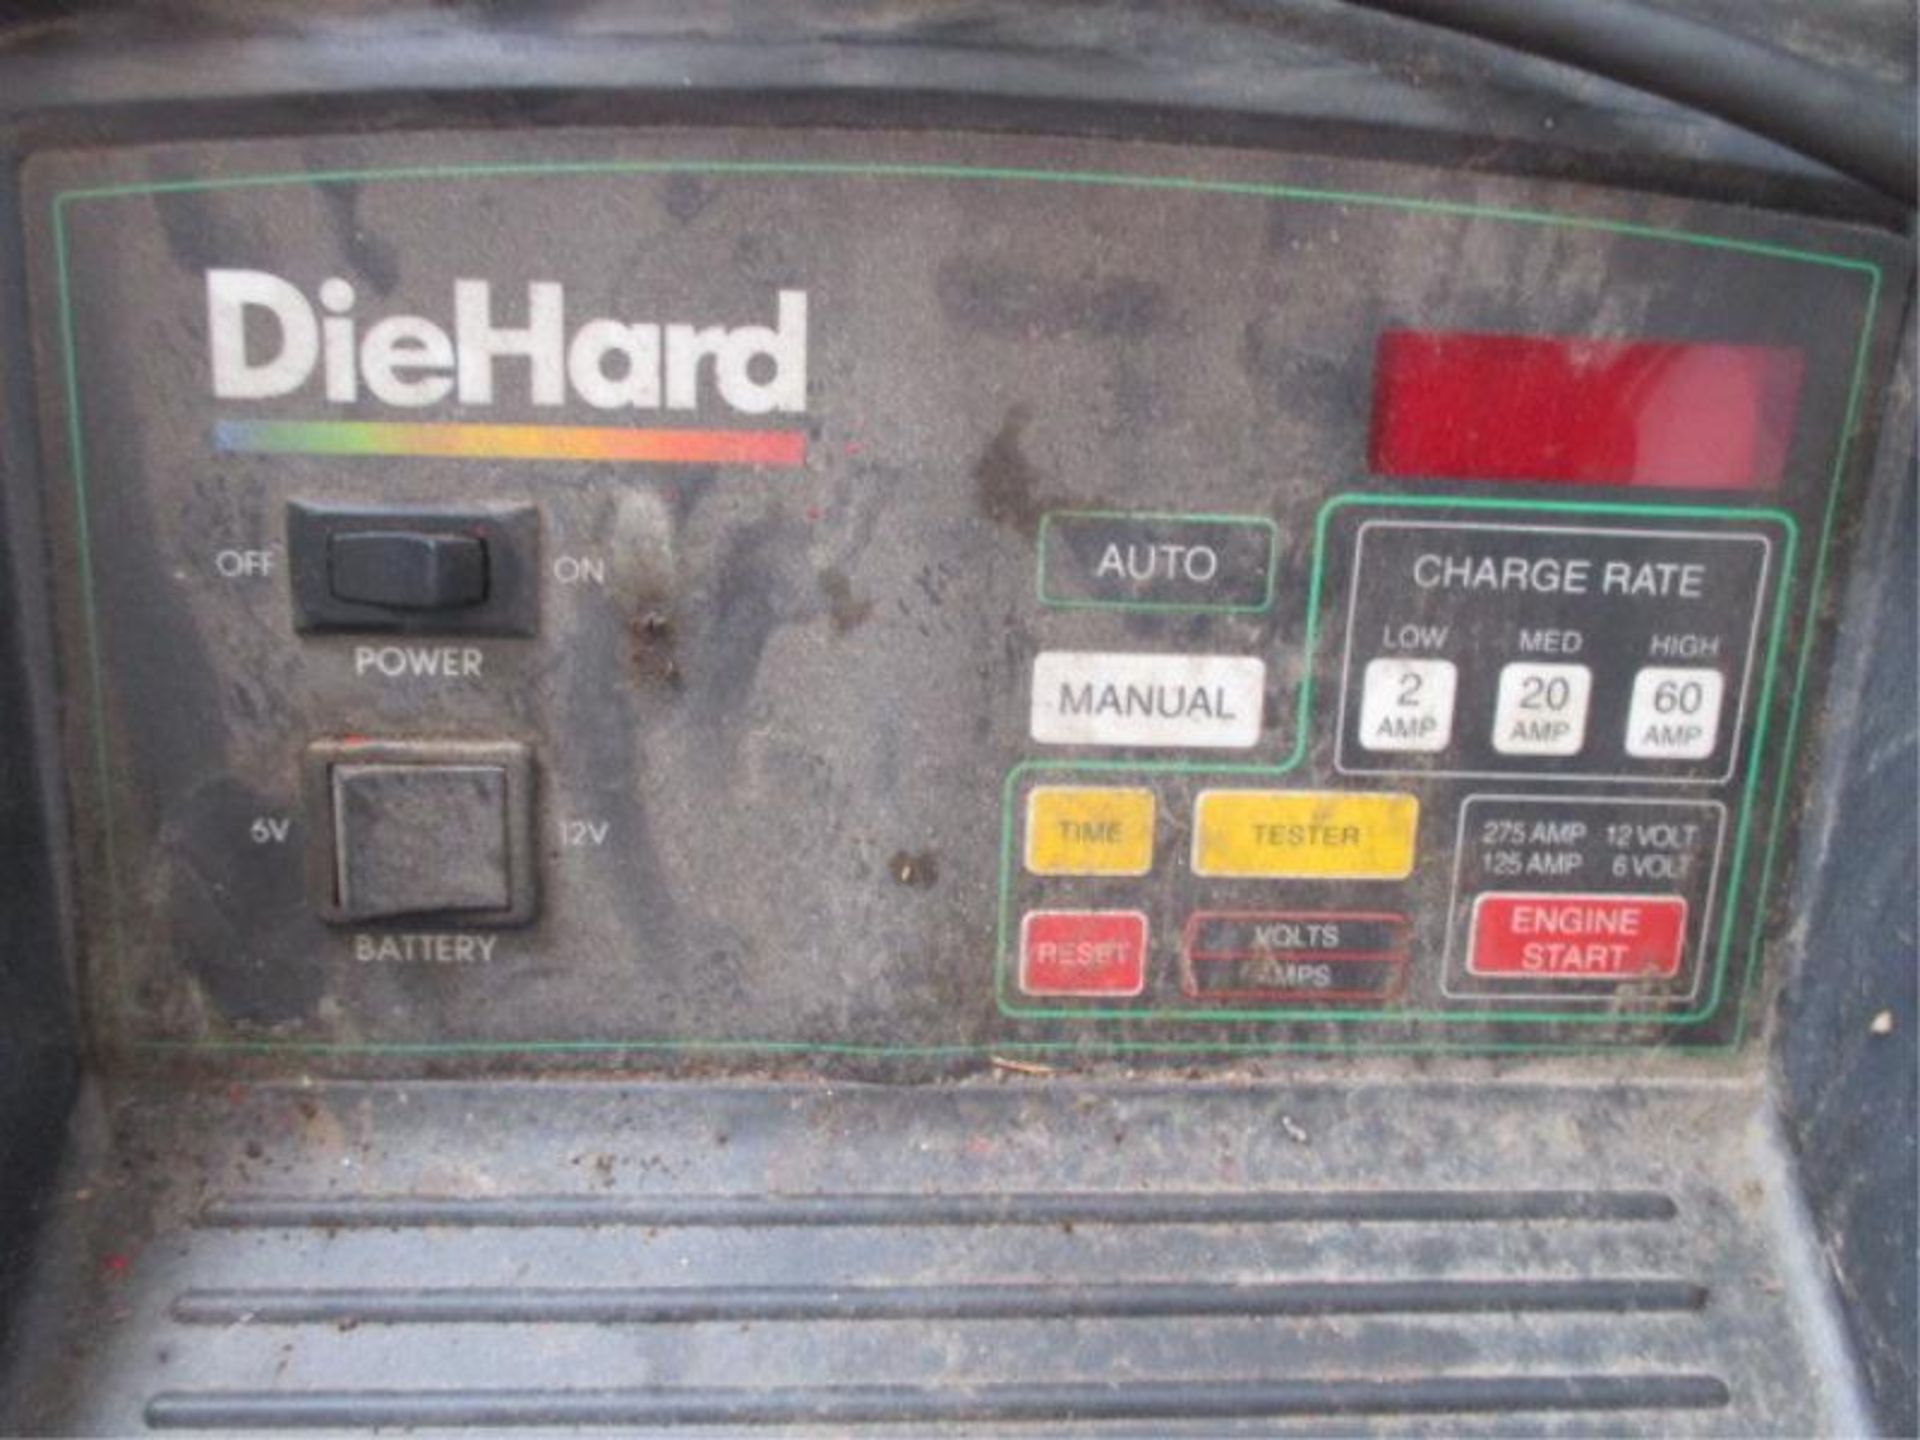 Die Hard 60 / 20 / 2 Amp Fully automatic Battery Charger, Micro Processor Controlled w/ Digital - Image 2 of 6